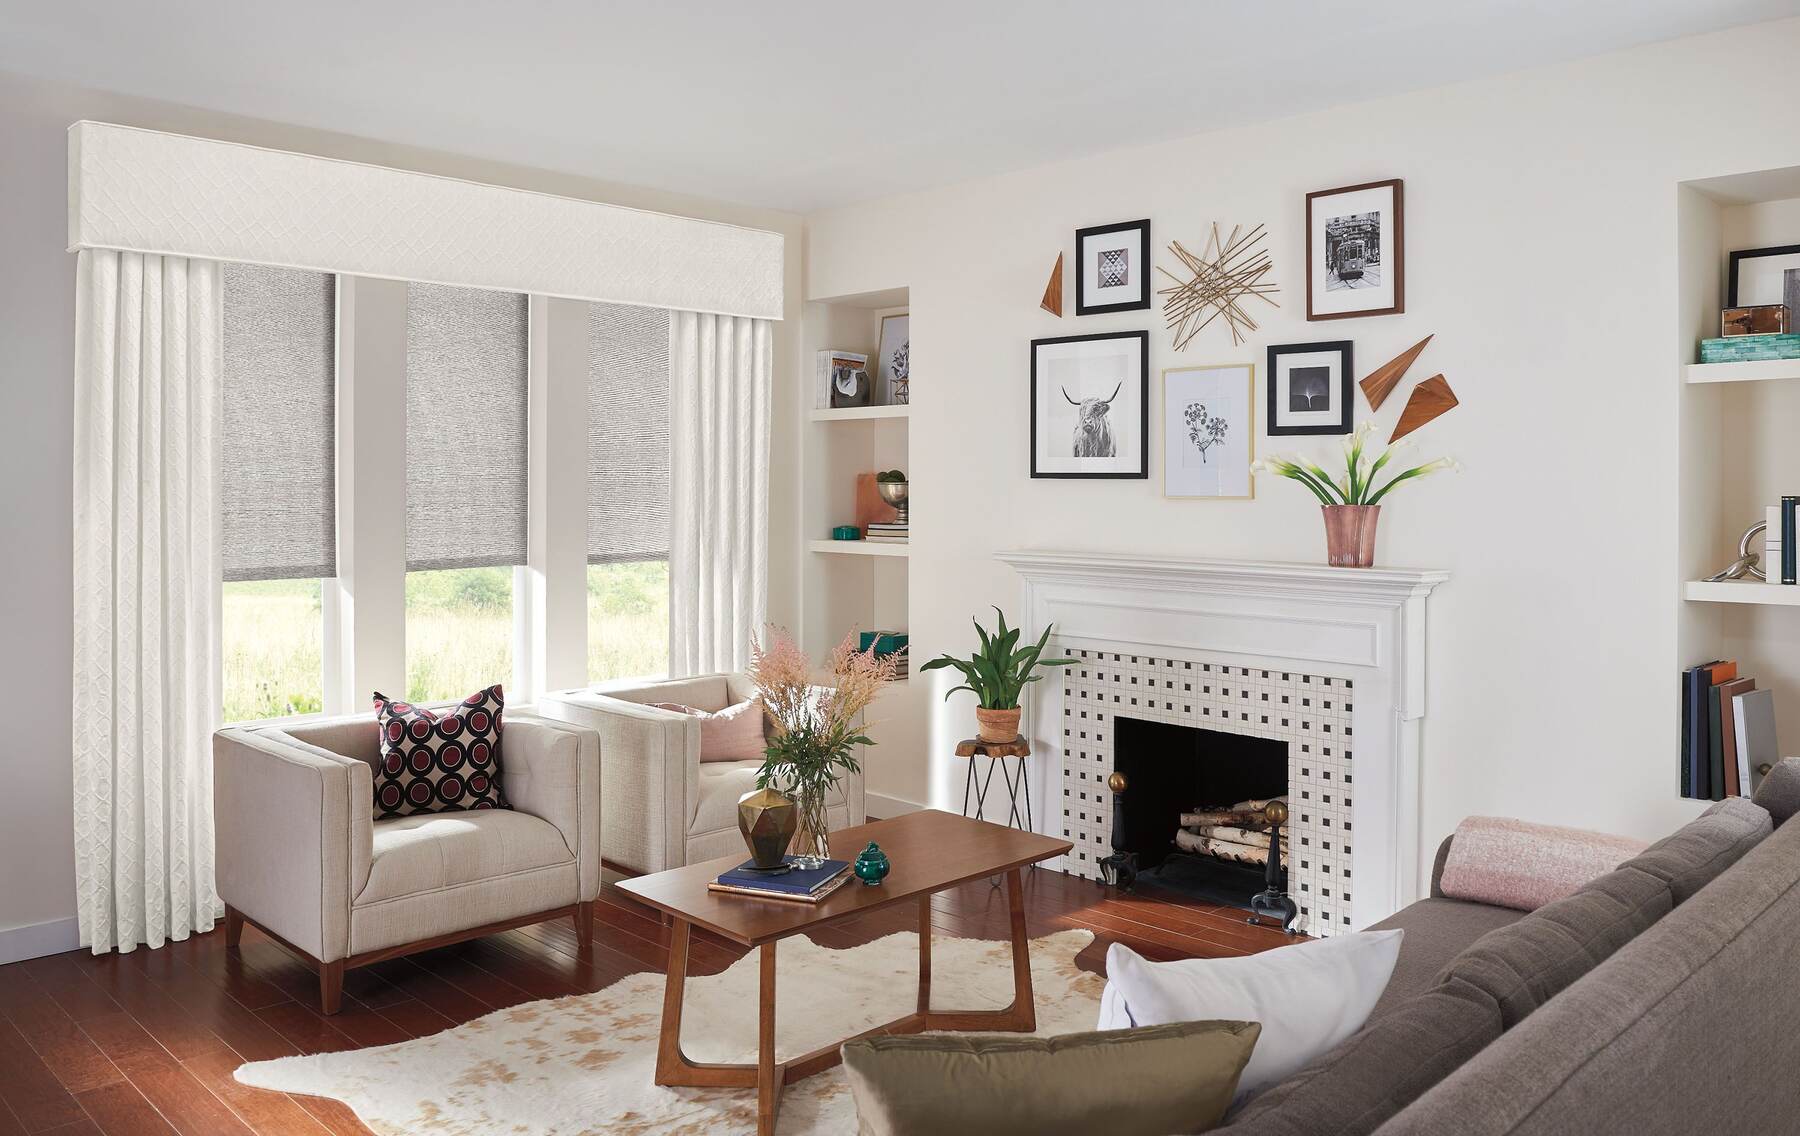 A cozy living room with a fireplace, comfortable couches, and a window offering a view